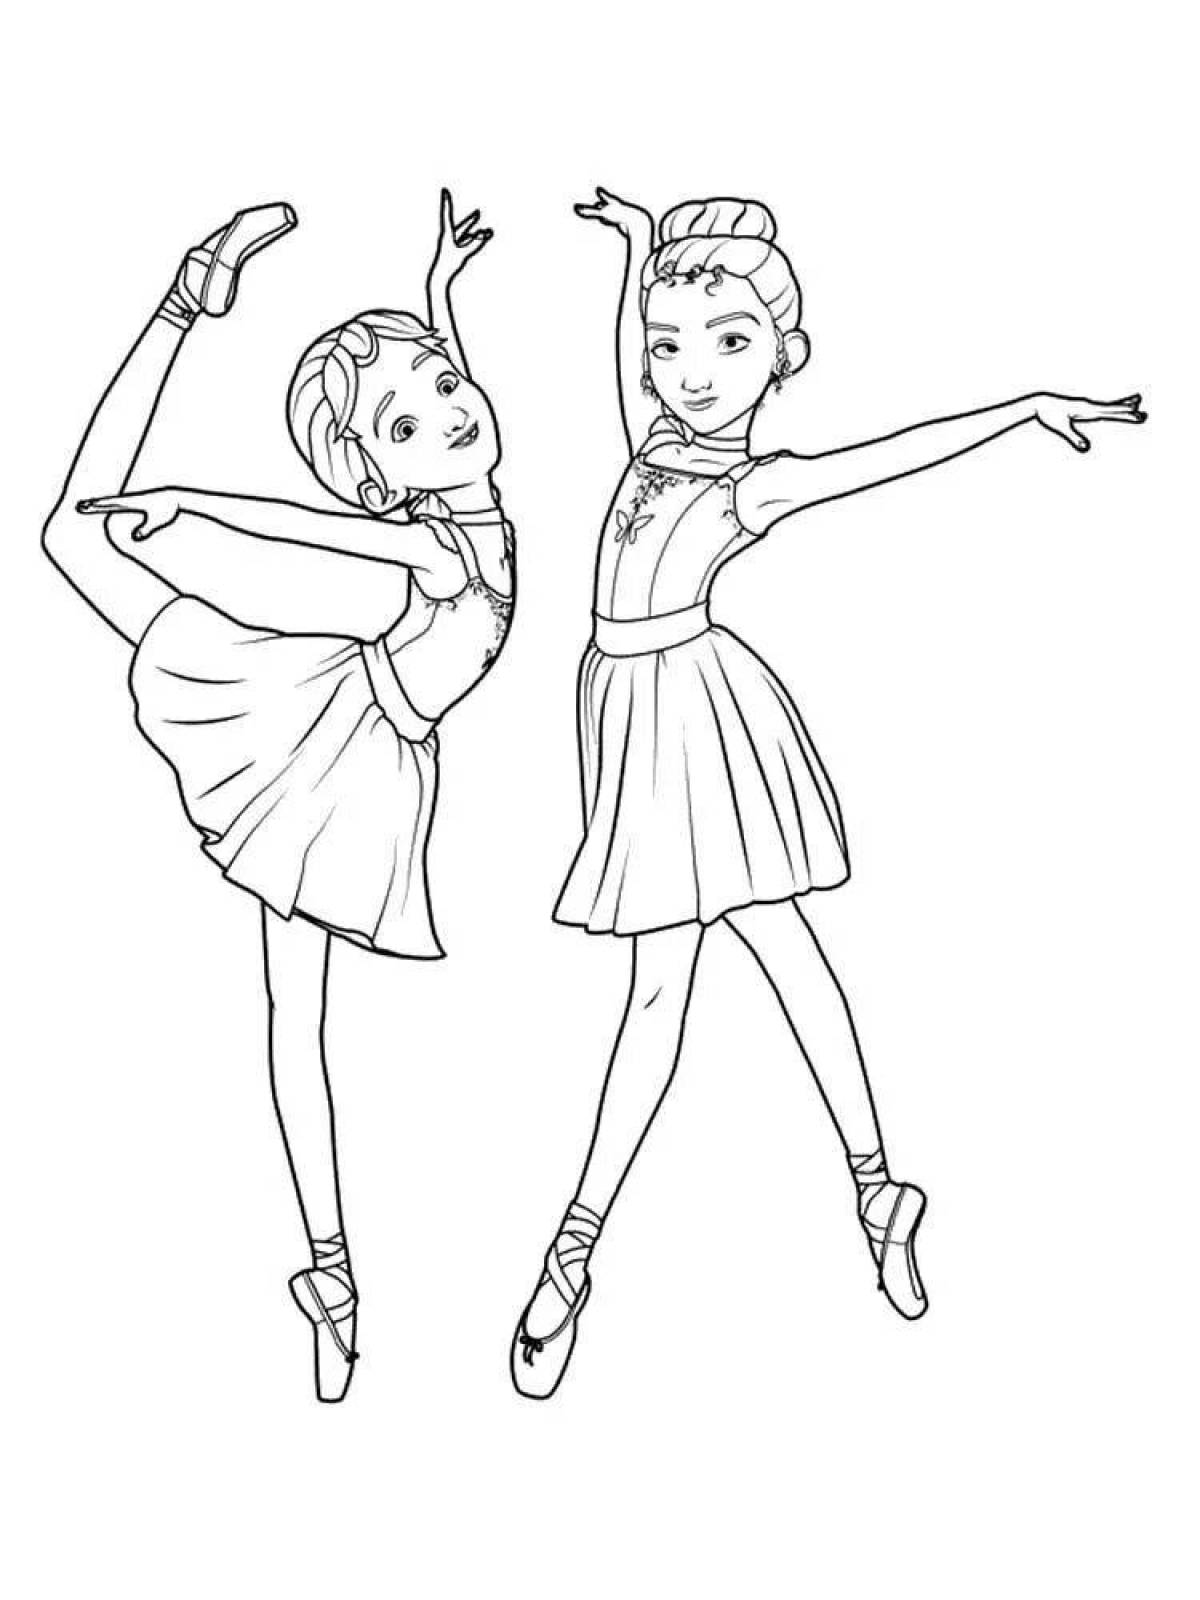 Awesome ballet coloring pages